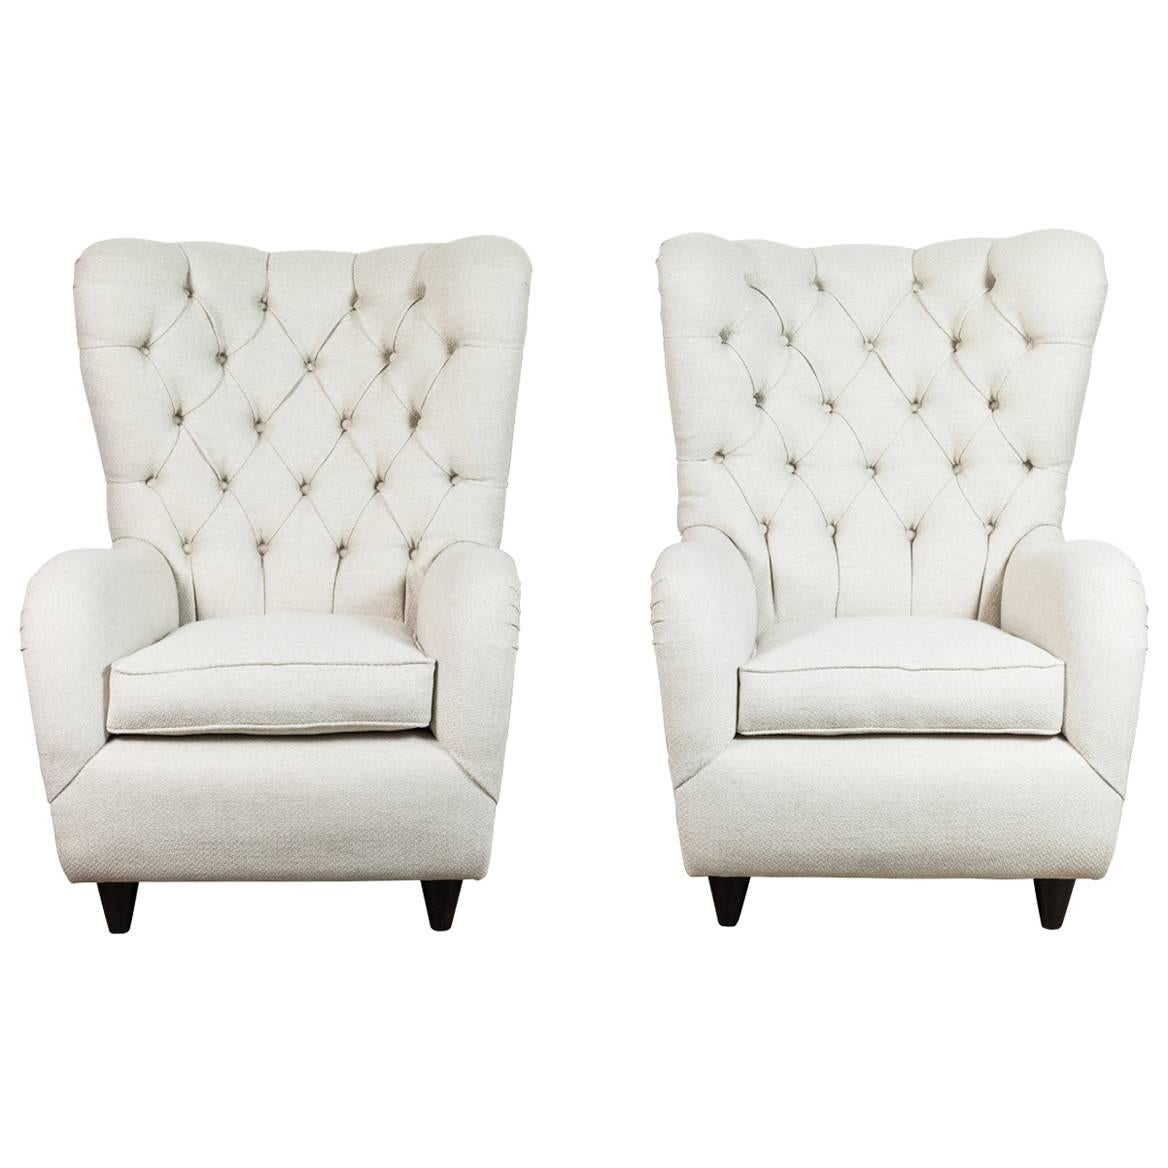 Pair of Italian Tufted Wingback Chairs